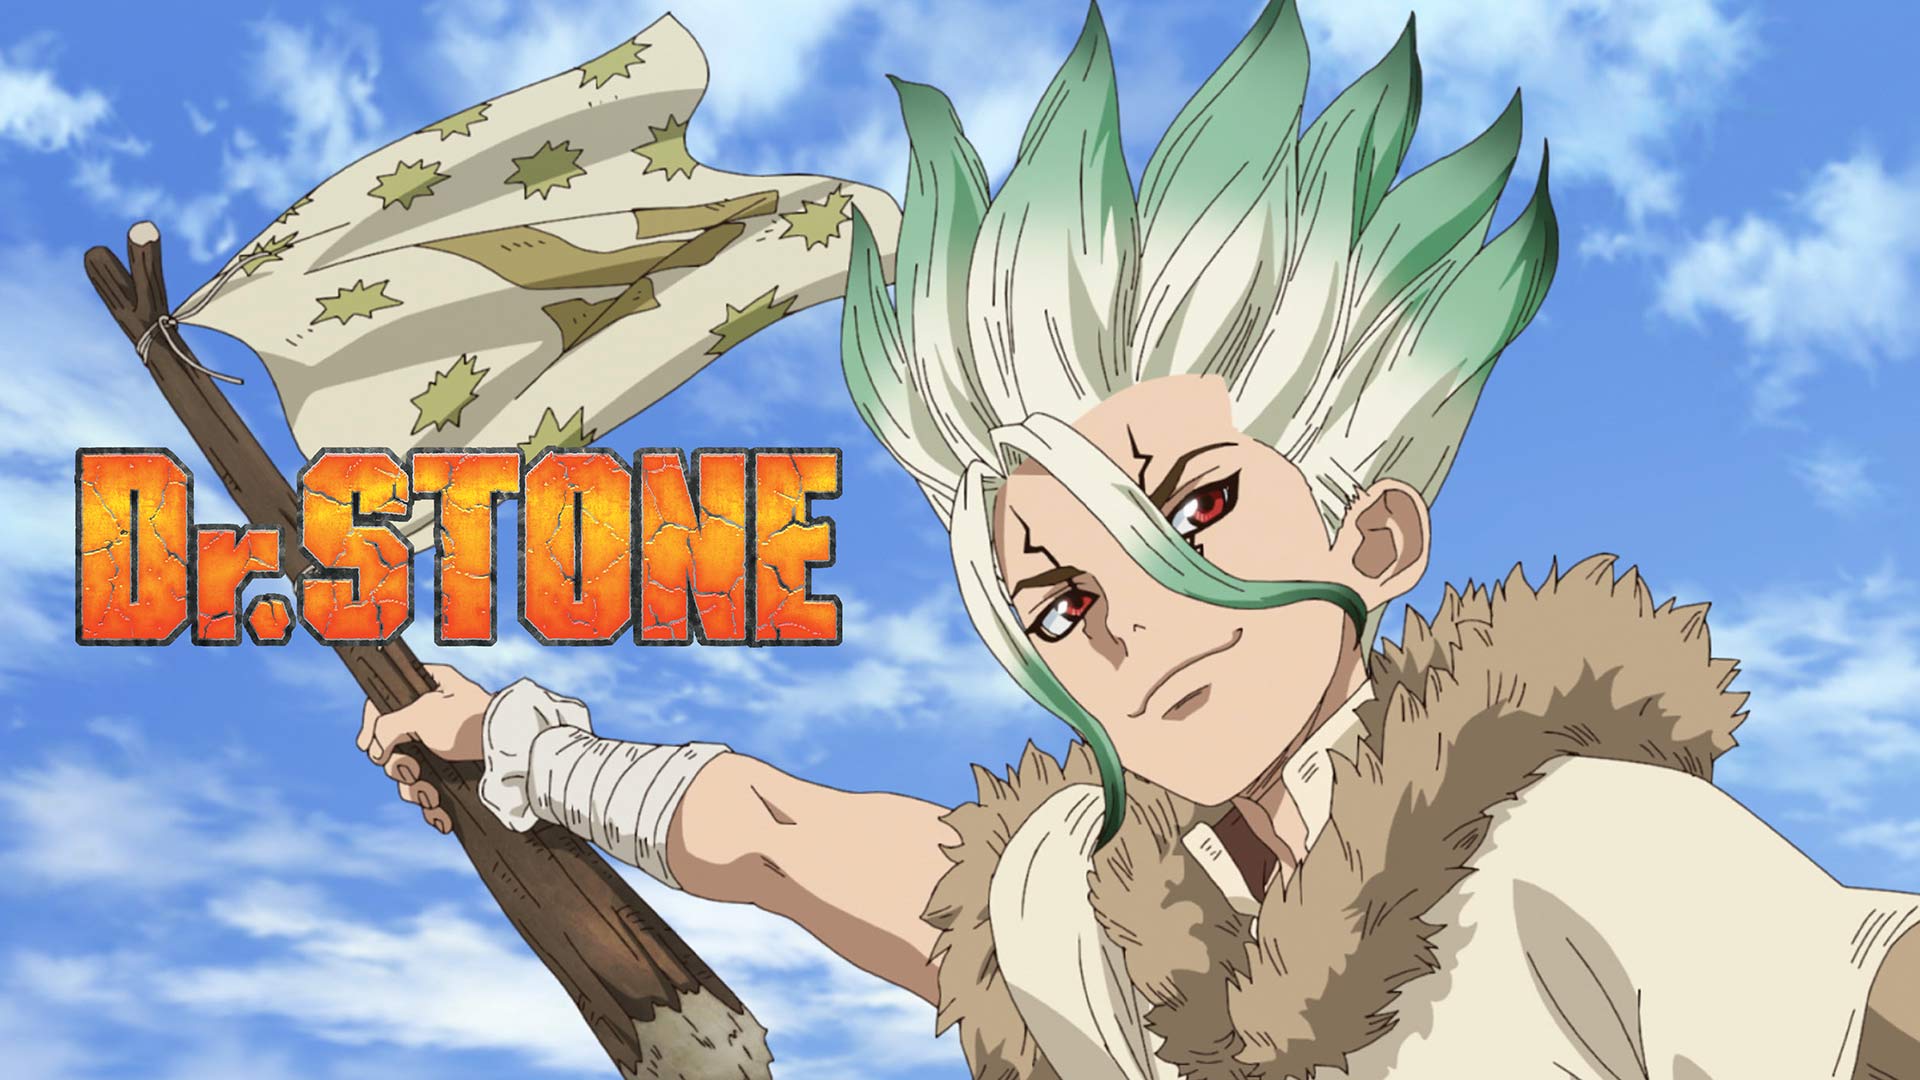 Dr. STONE Season 1 - watch full episodes streaming online